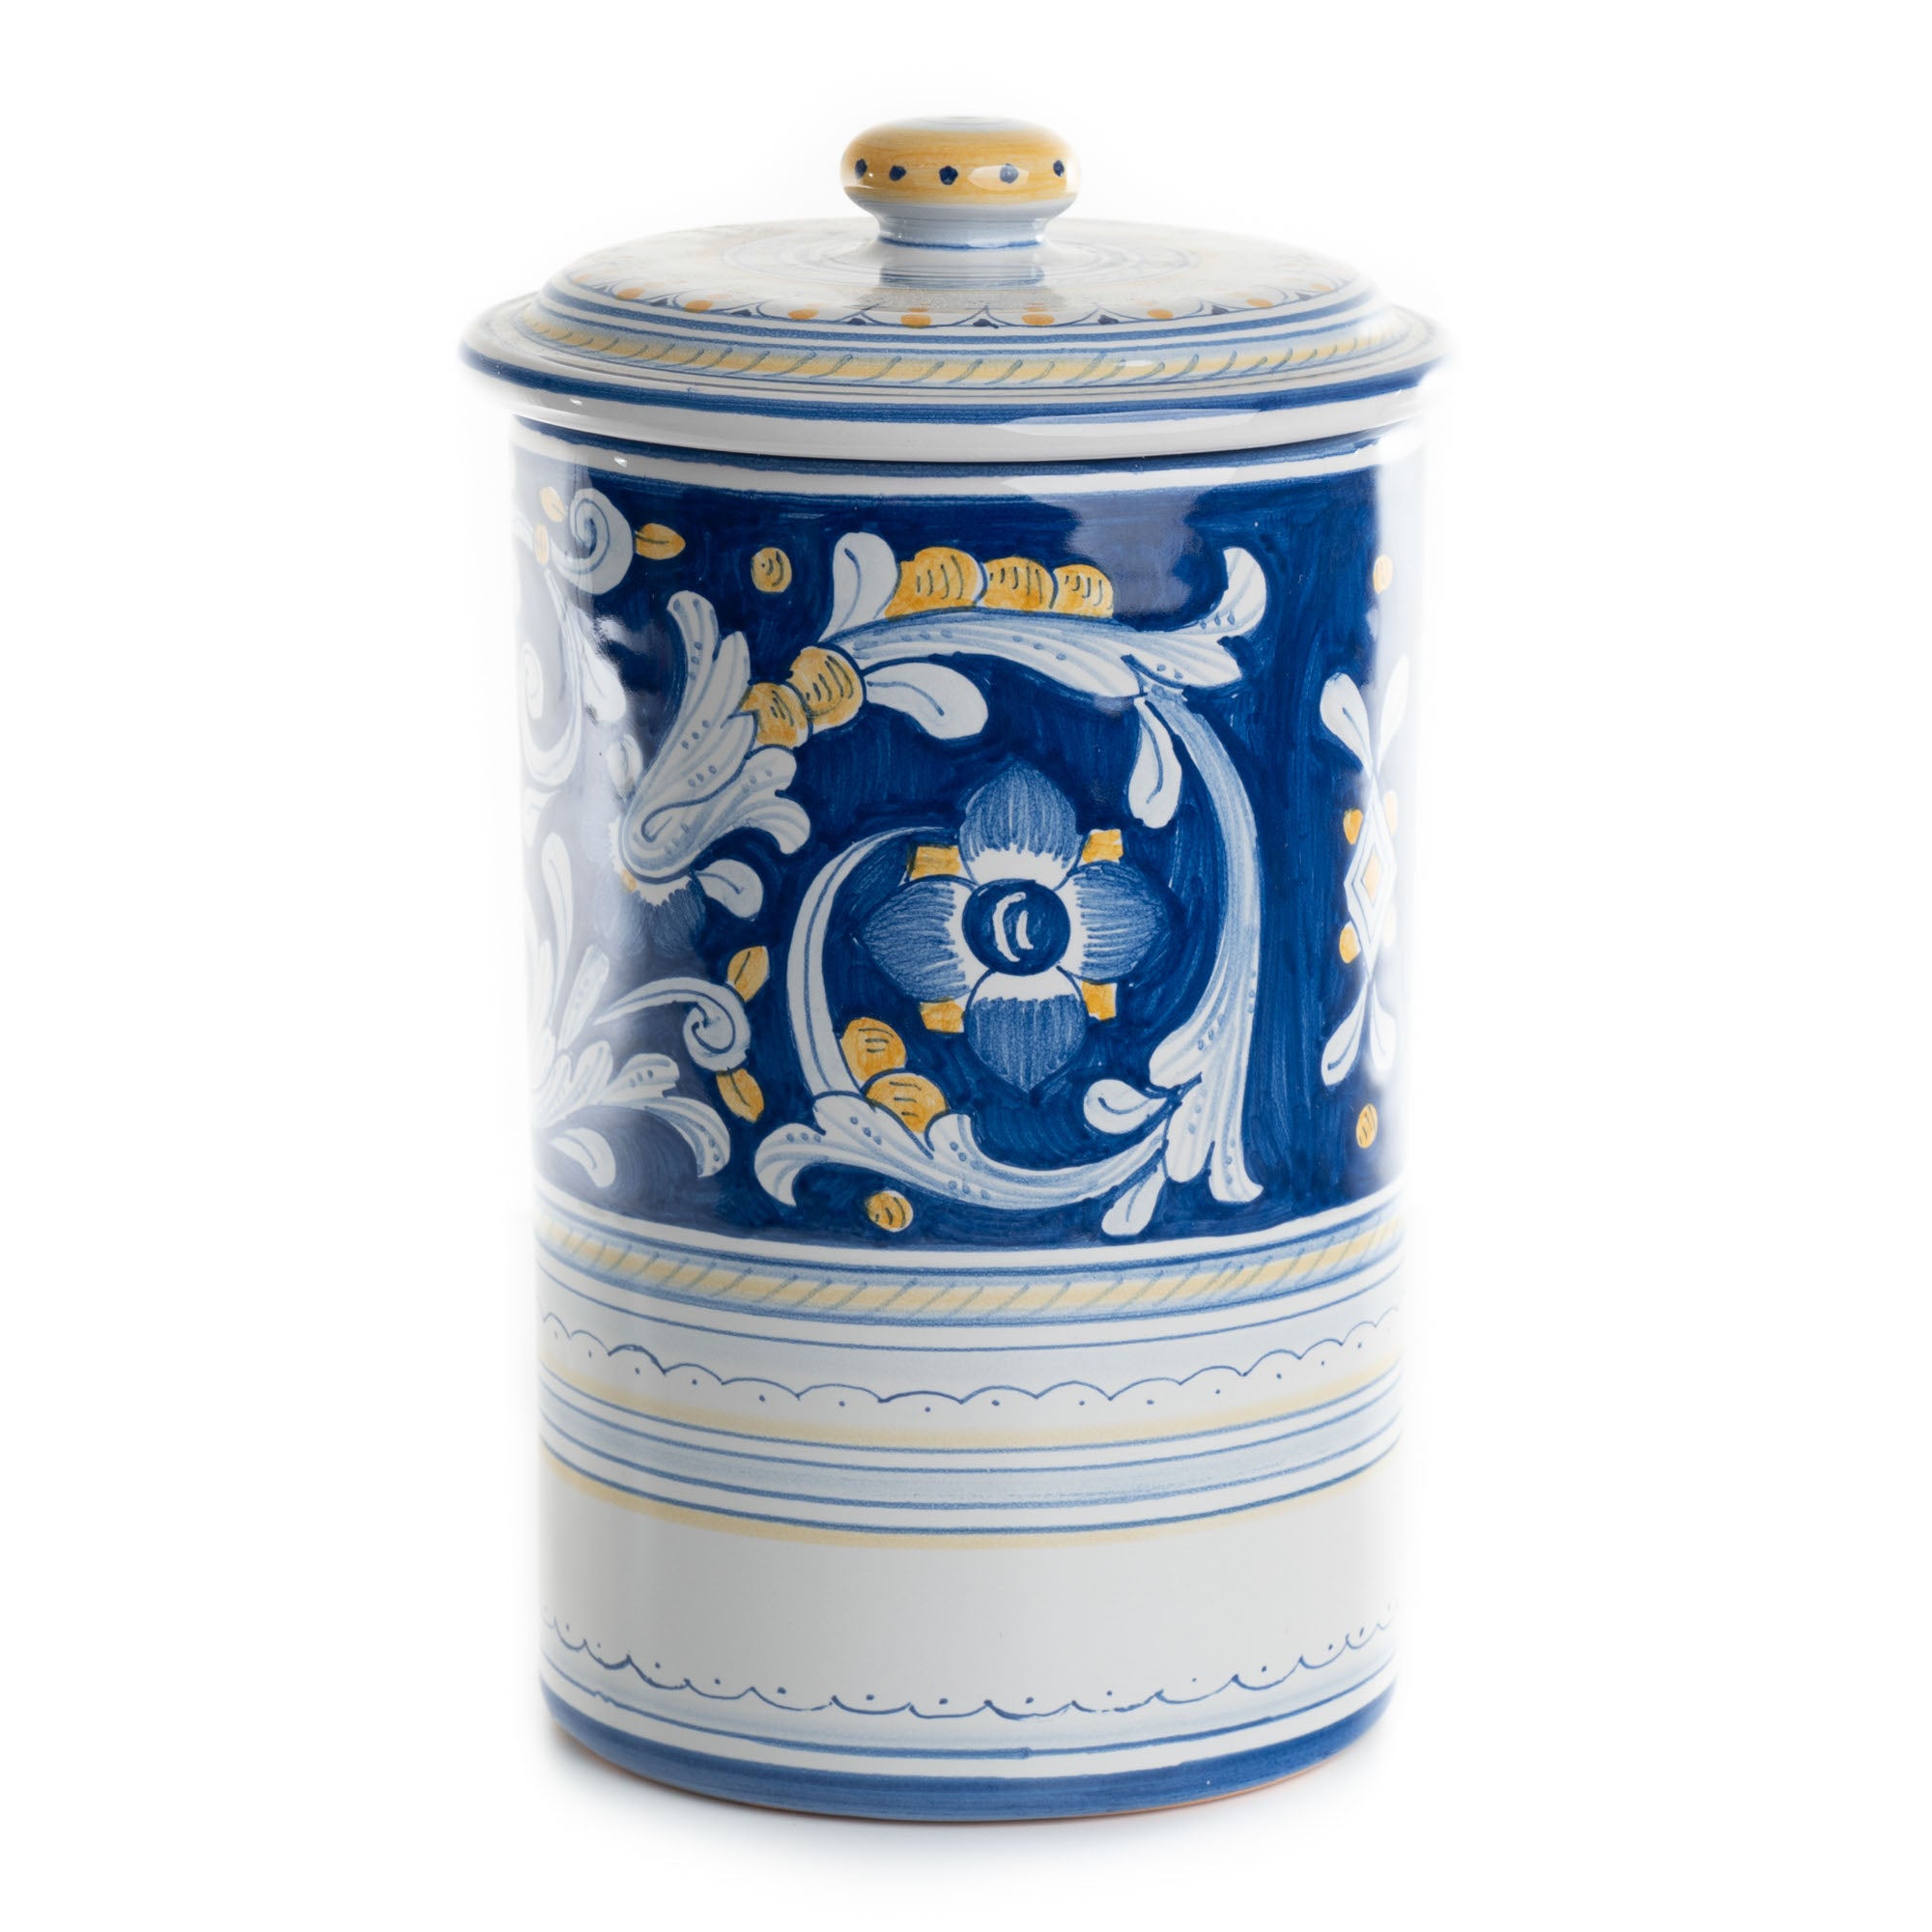 Antico Deruta Caffe Canister, ceramics, pottery, italian design, majolica, handmade, handcrafted, handpainted, home decor, kitchen art, home goods, deruta, majolica, Artisan, treasures, traditional art, modern art, gift ideas, style, SF, shop small business, artists, shop online, landmark store, legacy, one of a kind, limited edition, gift guide, gift shop, retail shop, decorations, shopping, italy, home staging, home decorating, home interiors